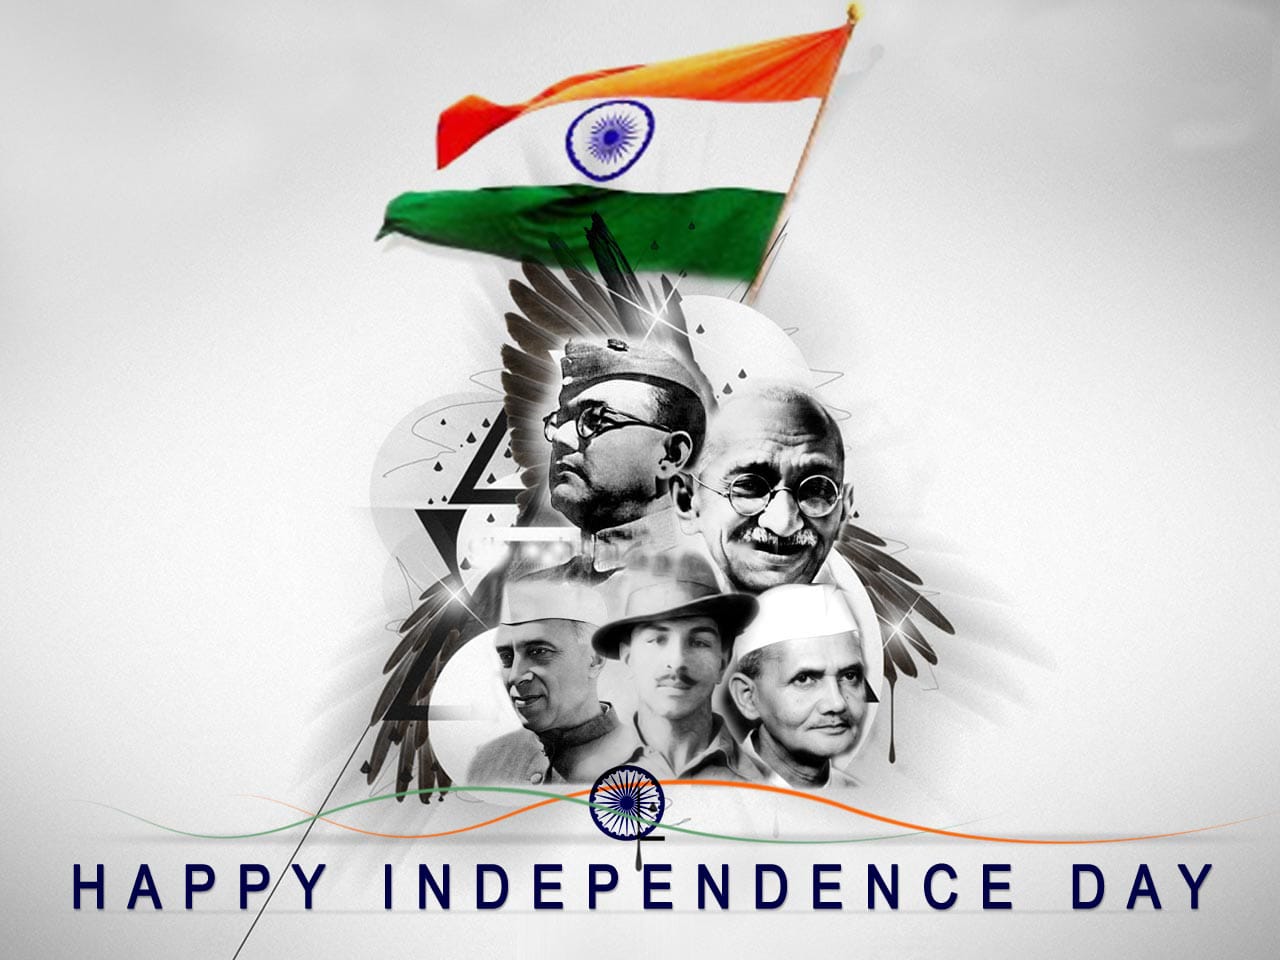 Happy Independence Day wishes. Happy Independence Day: GIFs, Image to send to your family, friends and loved ones on 15th August. Trending & Viral News